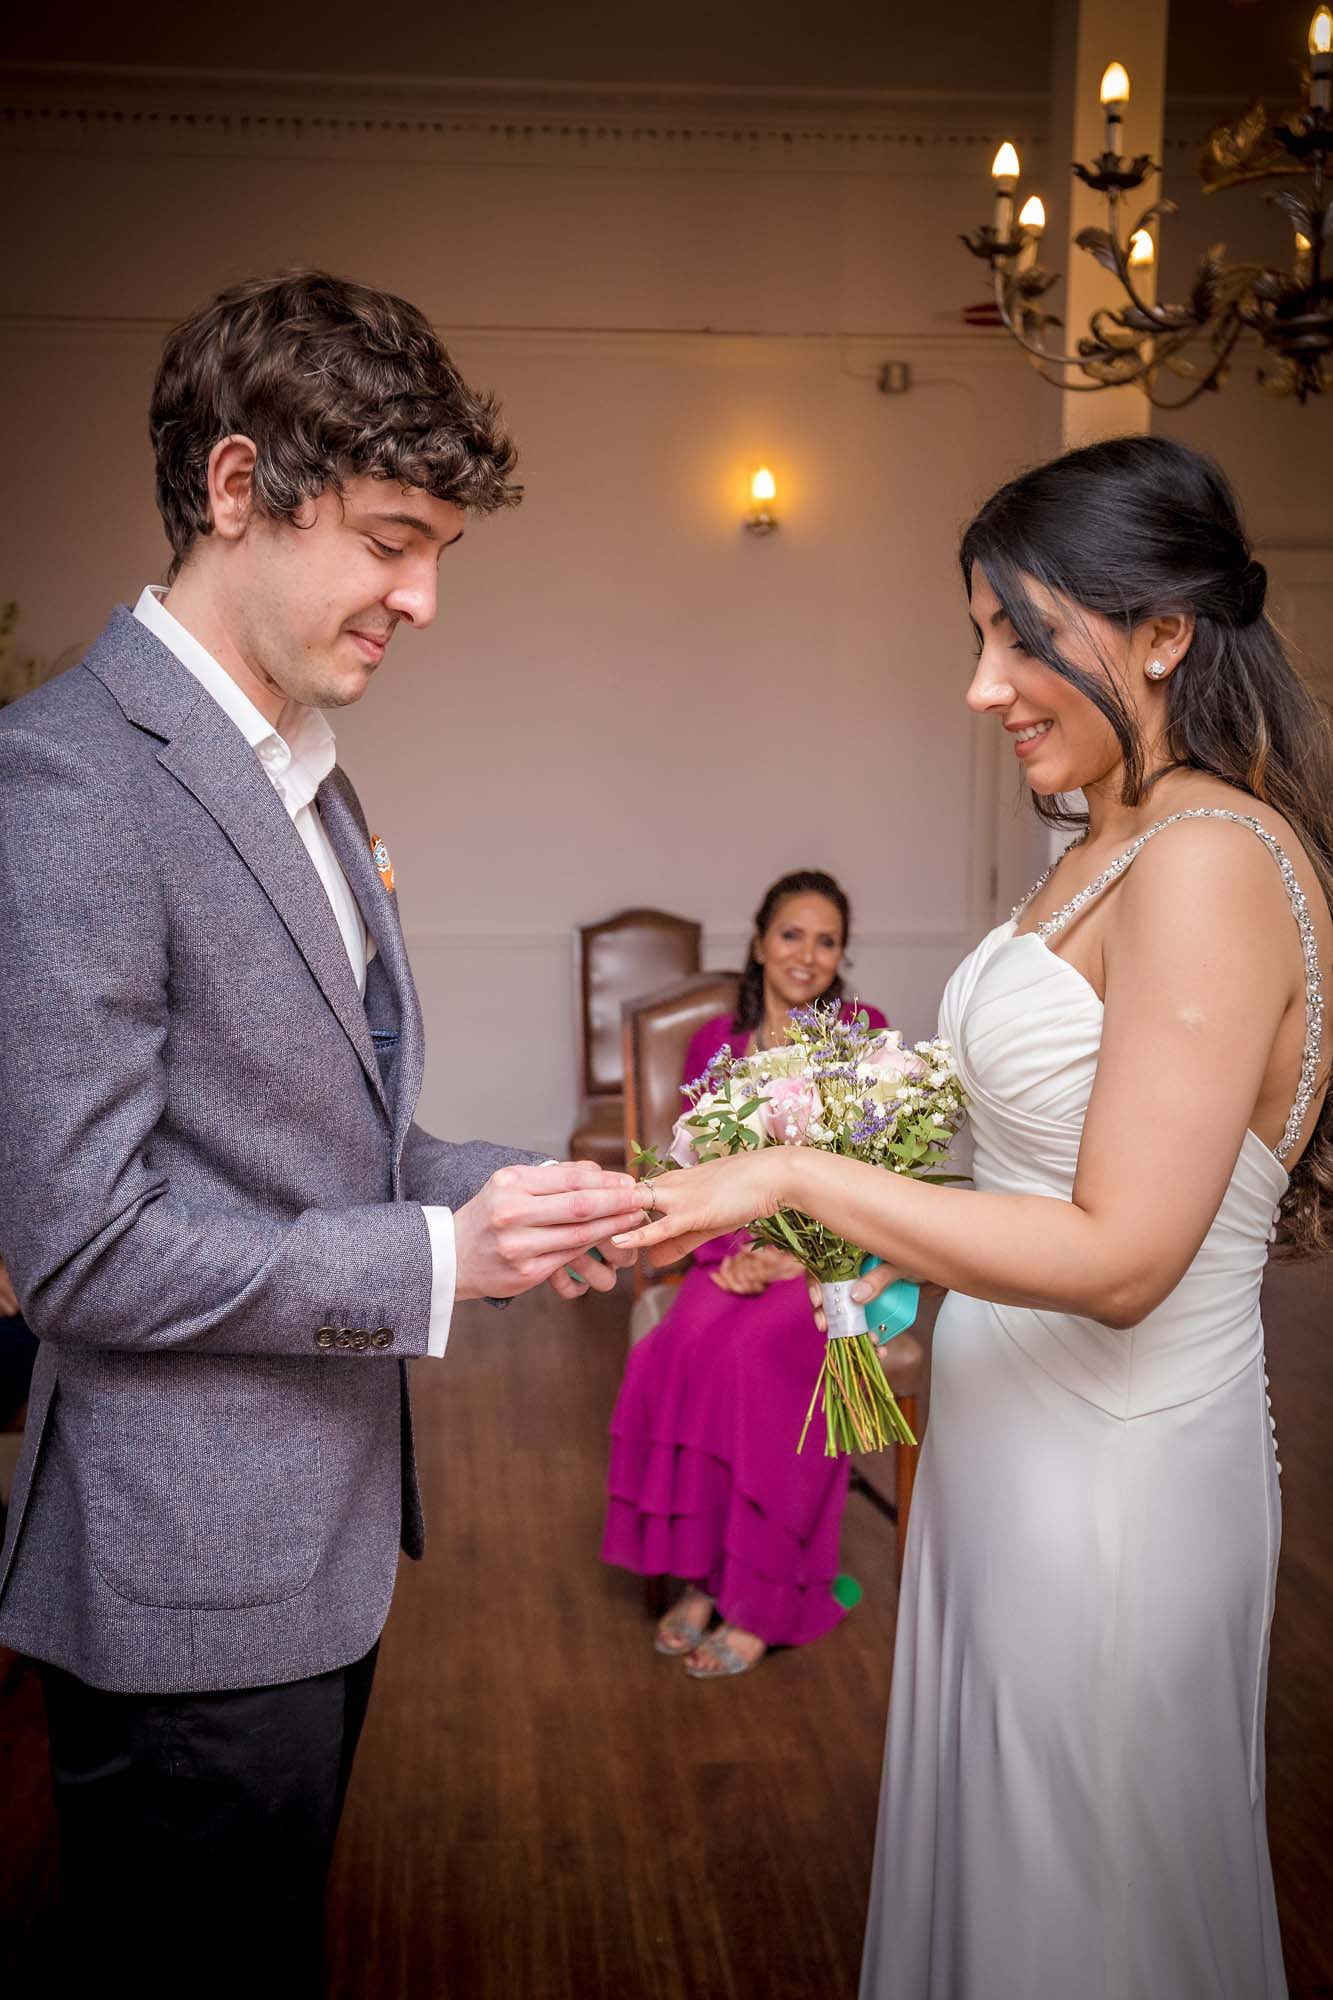 The groom places the wedding ring on his smiling bride's finger in The Garen Room at Southwark